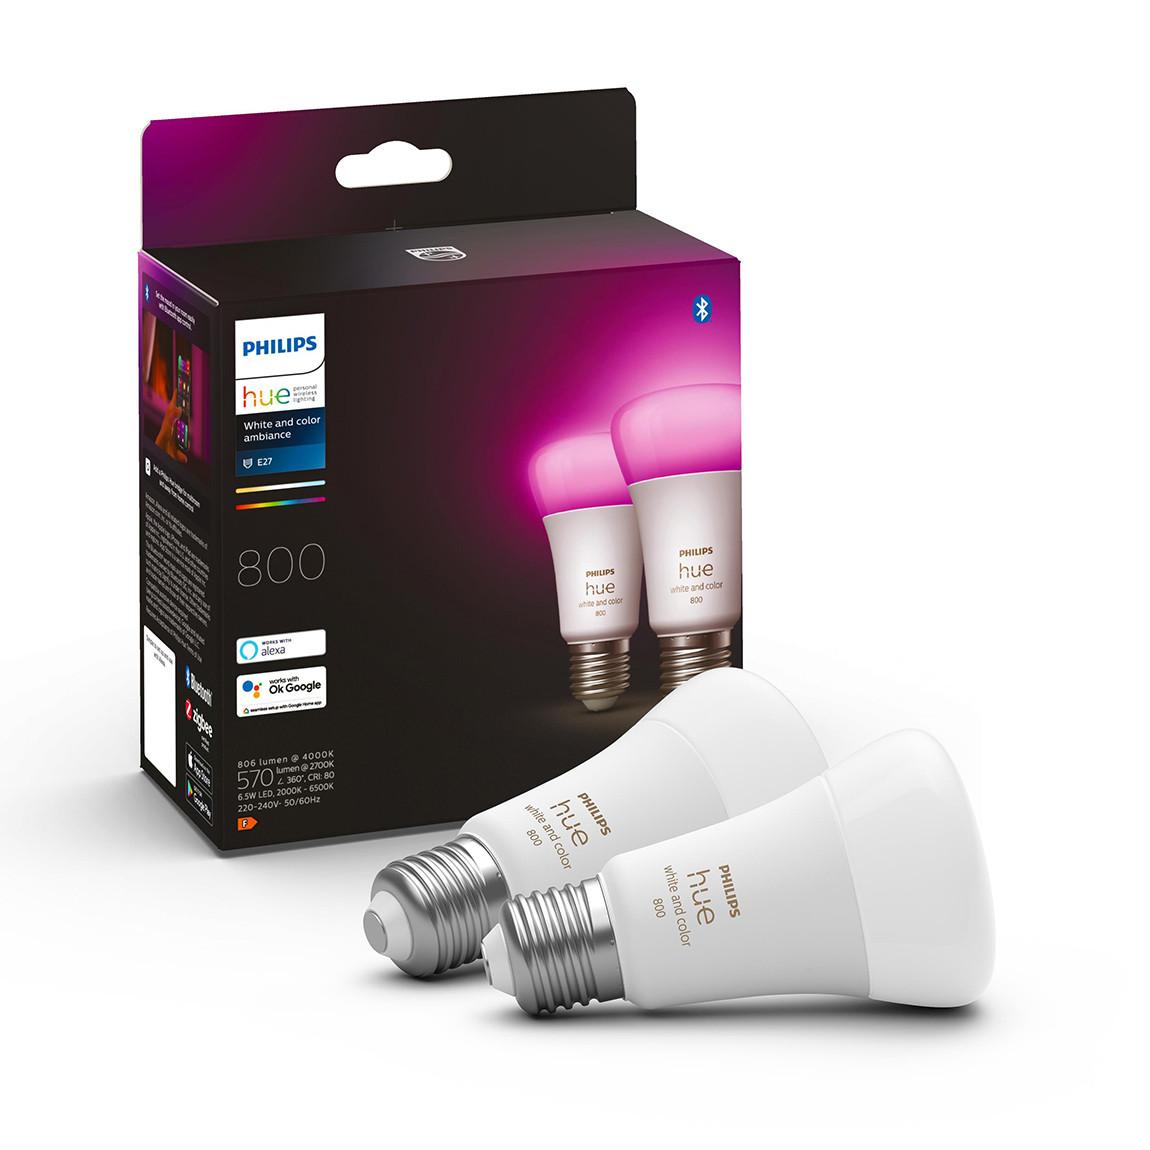 Philips Hue White and Color Ambiance E27 Bluetooth 2er-Set - LED-Lampe Verpackung